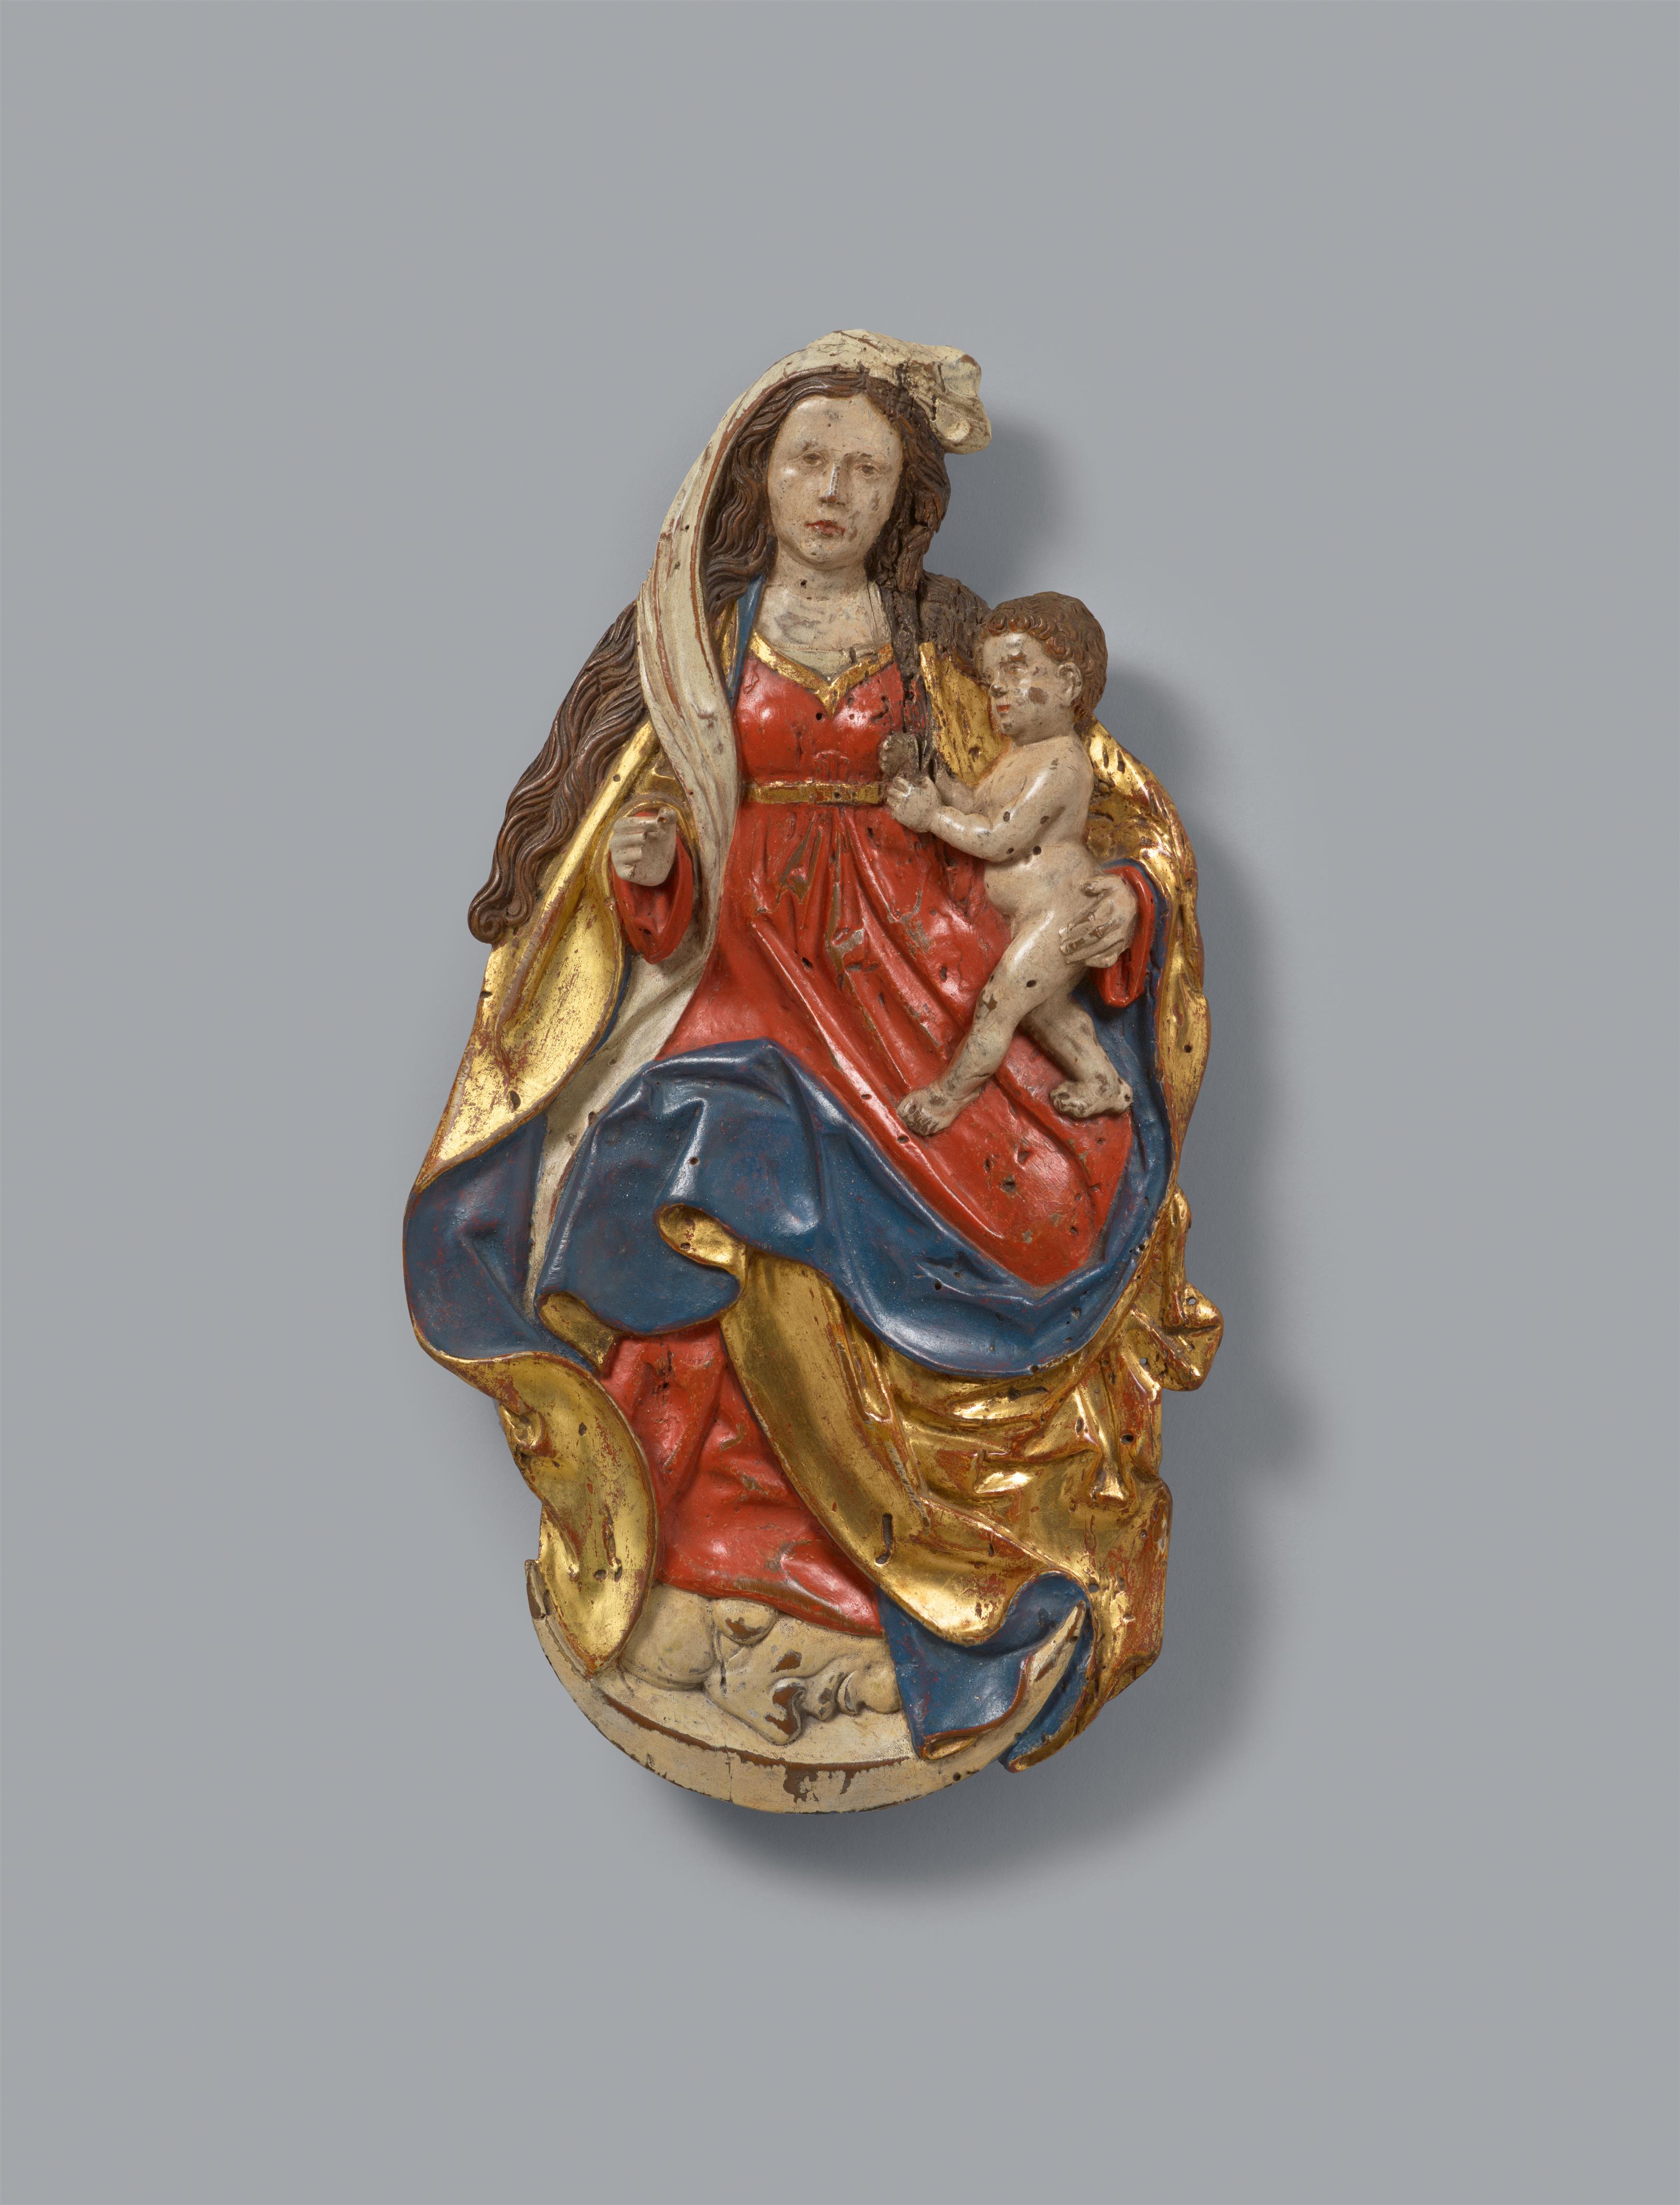 Franconia ca. 1510/1520 - A Franconian carved wood relief of the Virgin and Child, around 1510/1520 - image-1